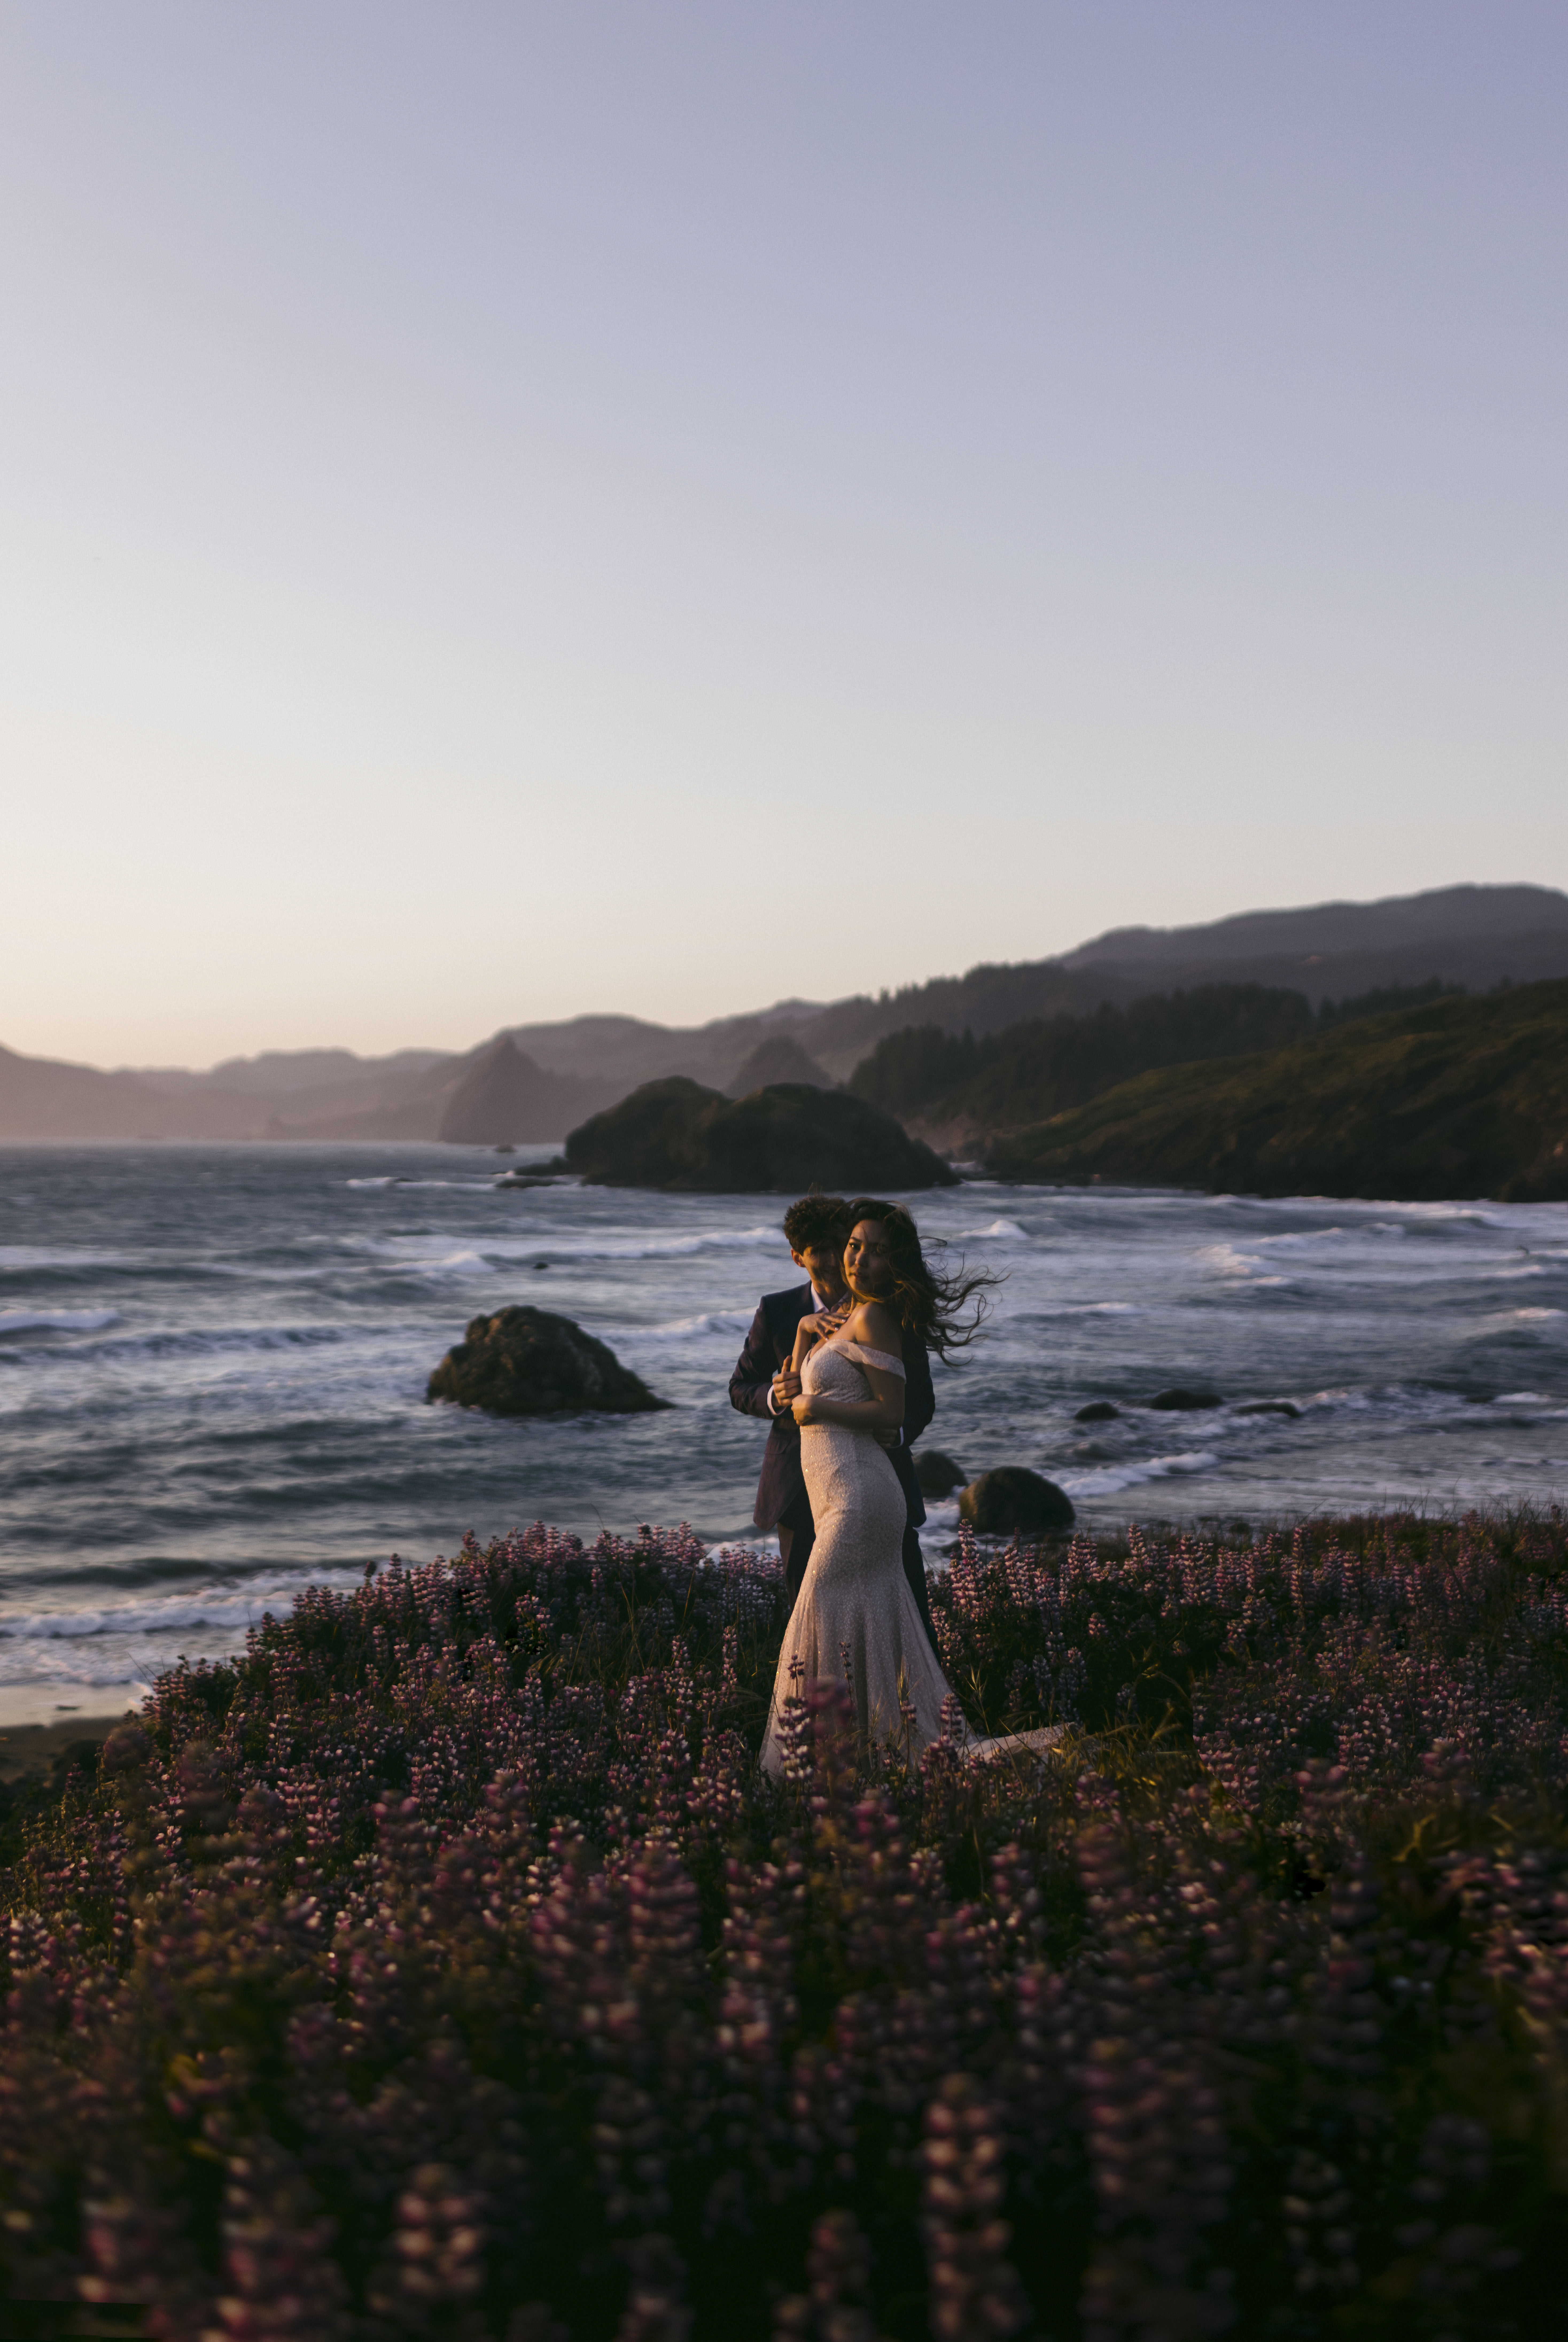 An adventure elopement in Oredon will be absolutely beautiful and provide fun and exploration.